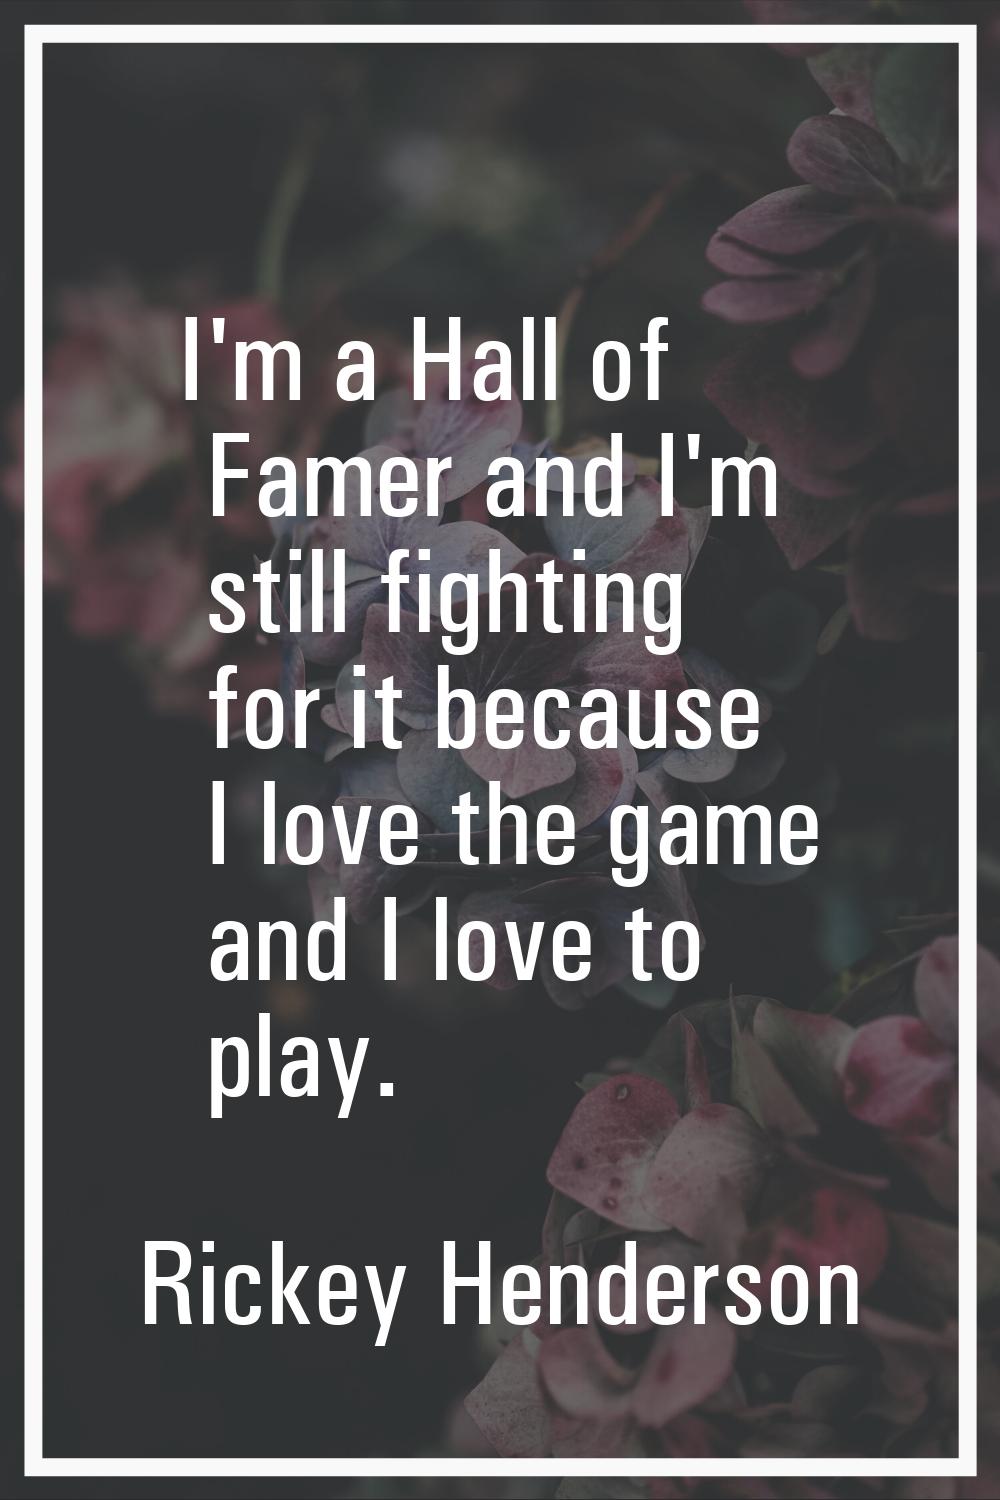 I'm a Hall of Famer and I'm still fighting for it because I love the game and I love to play.